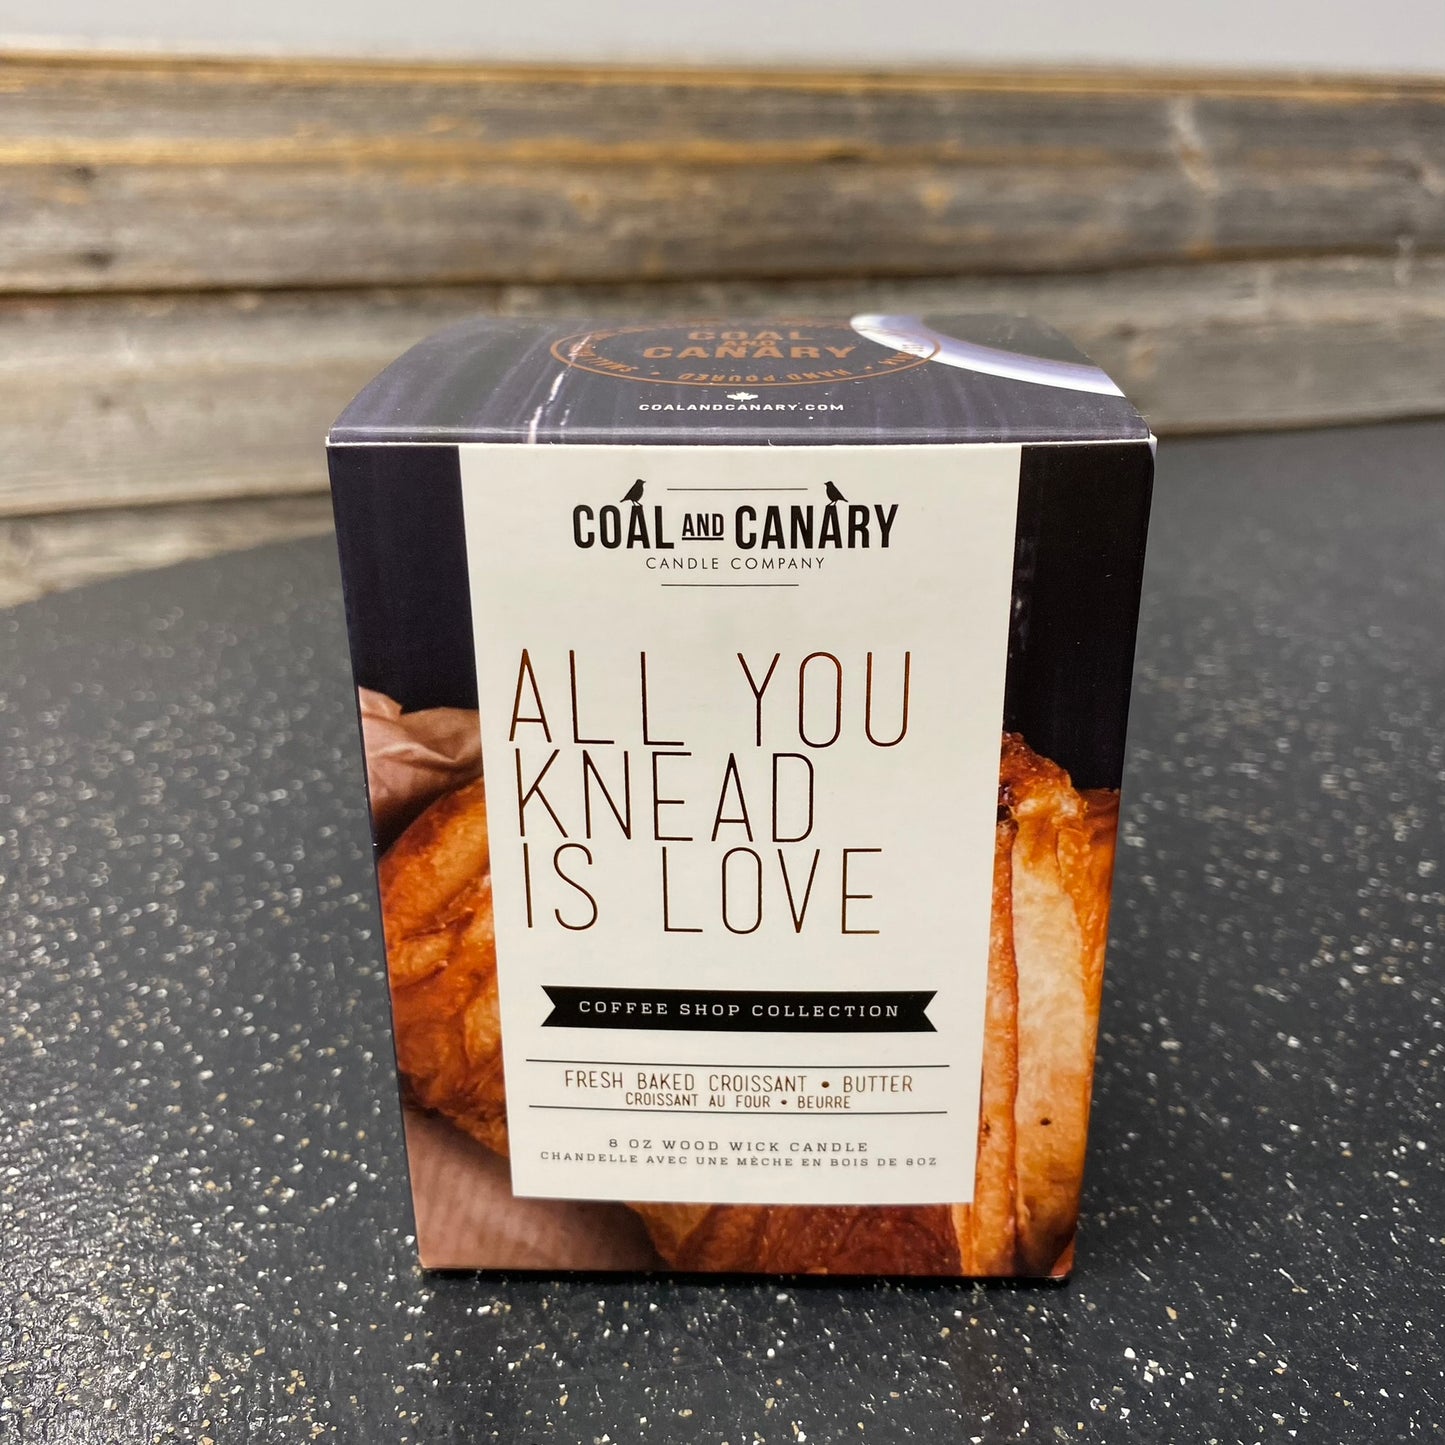 All You Knead is Love by Coal & Canary